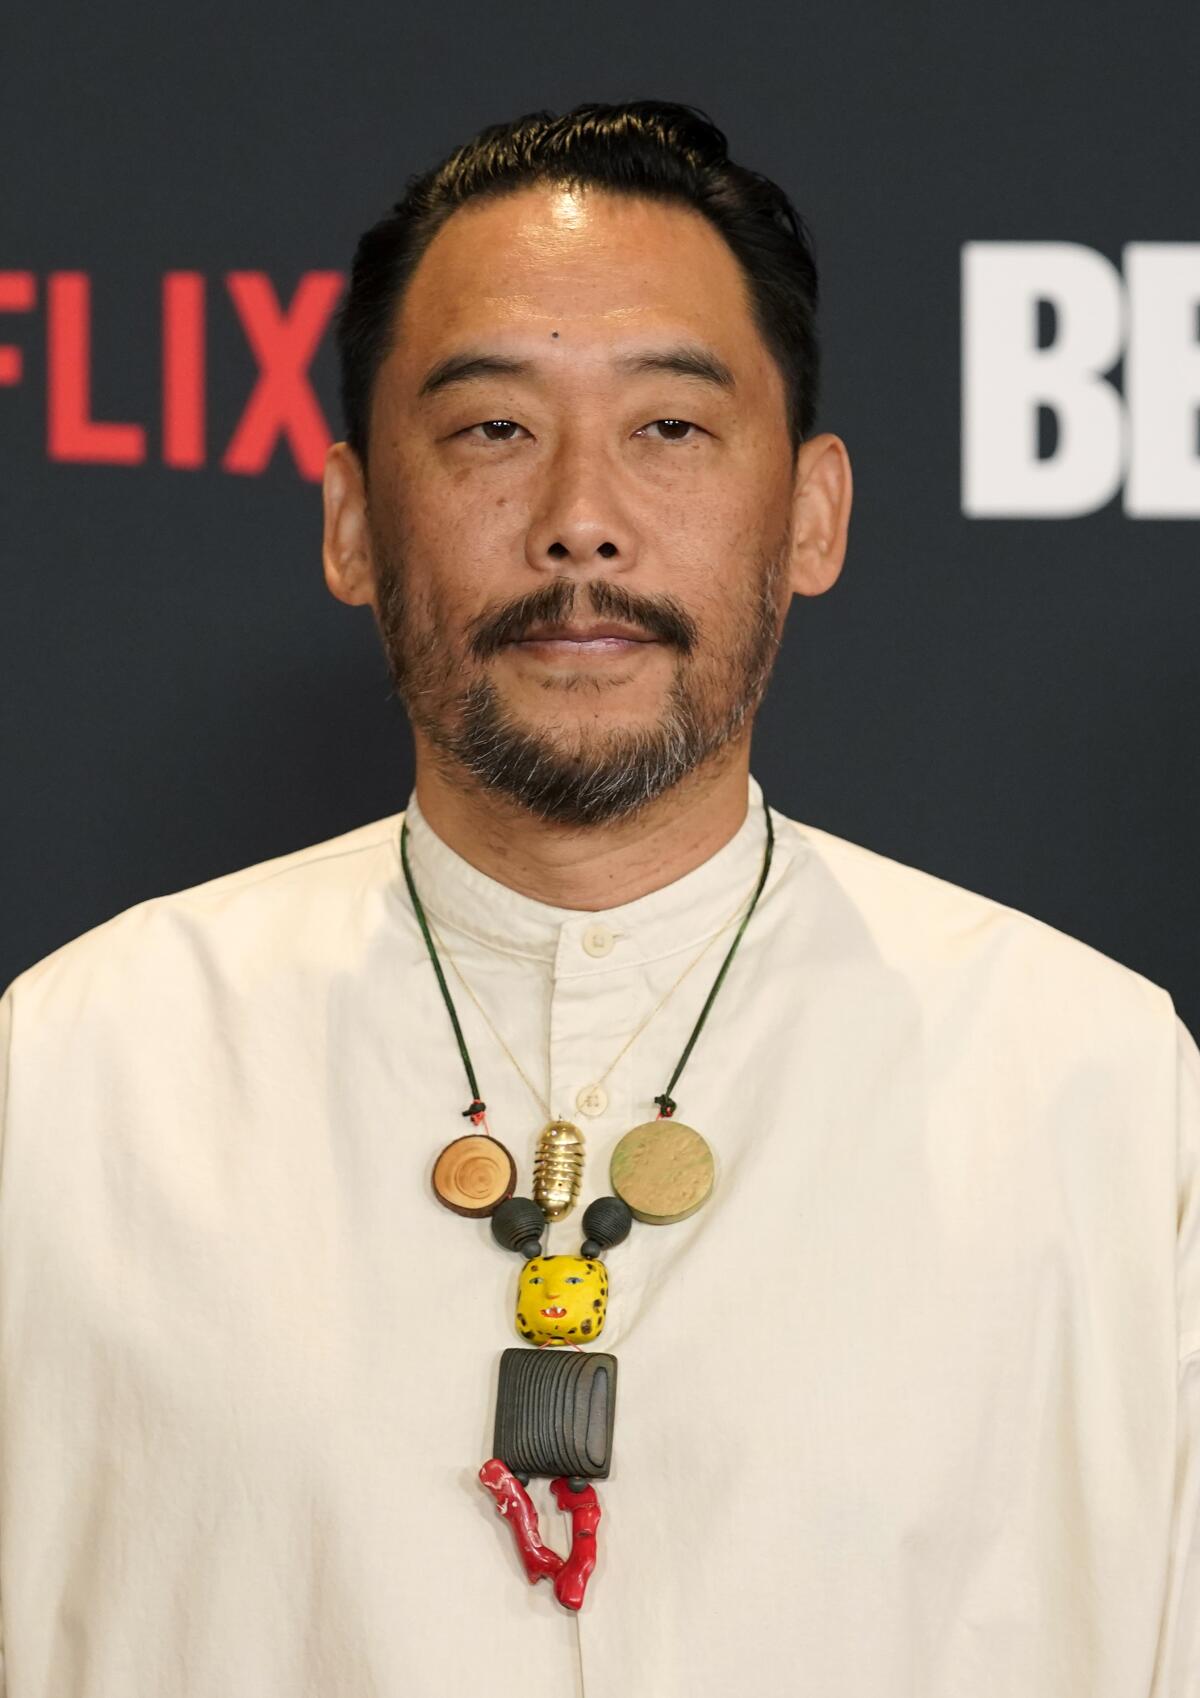 David Choe in an abstract necklace and white tunic at the "Beef" premiere